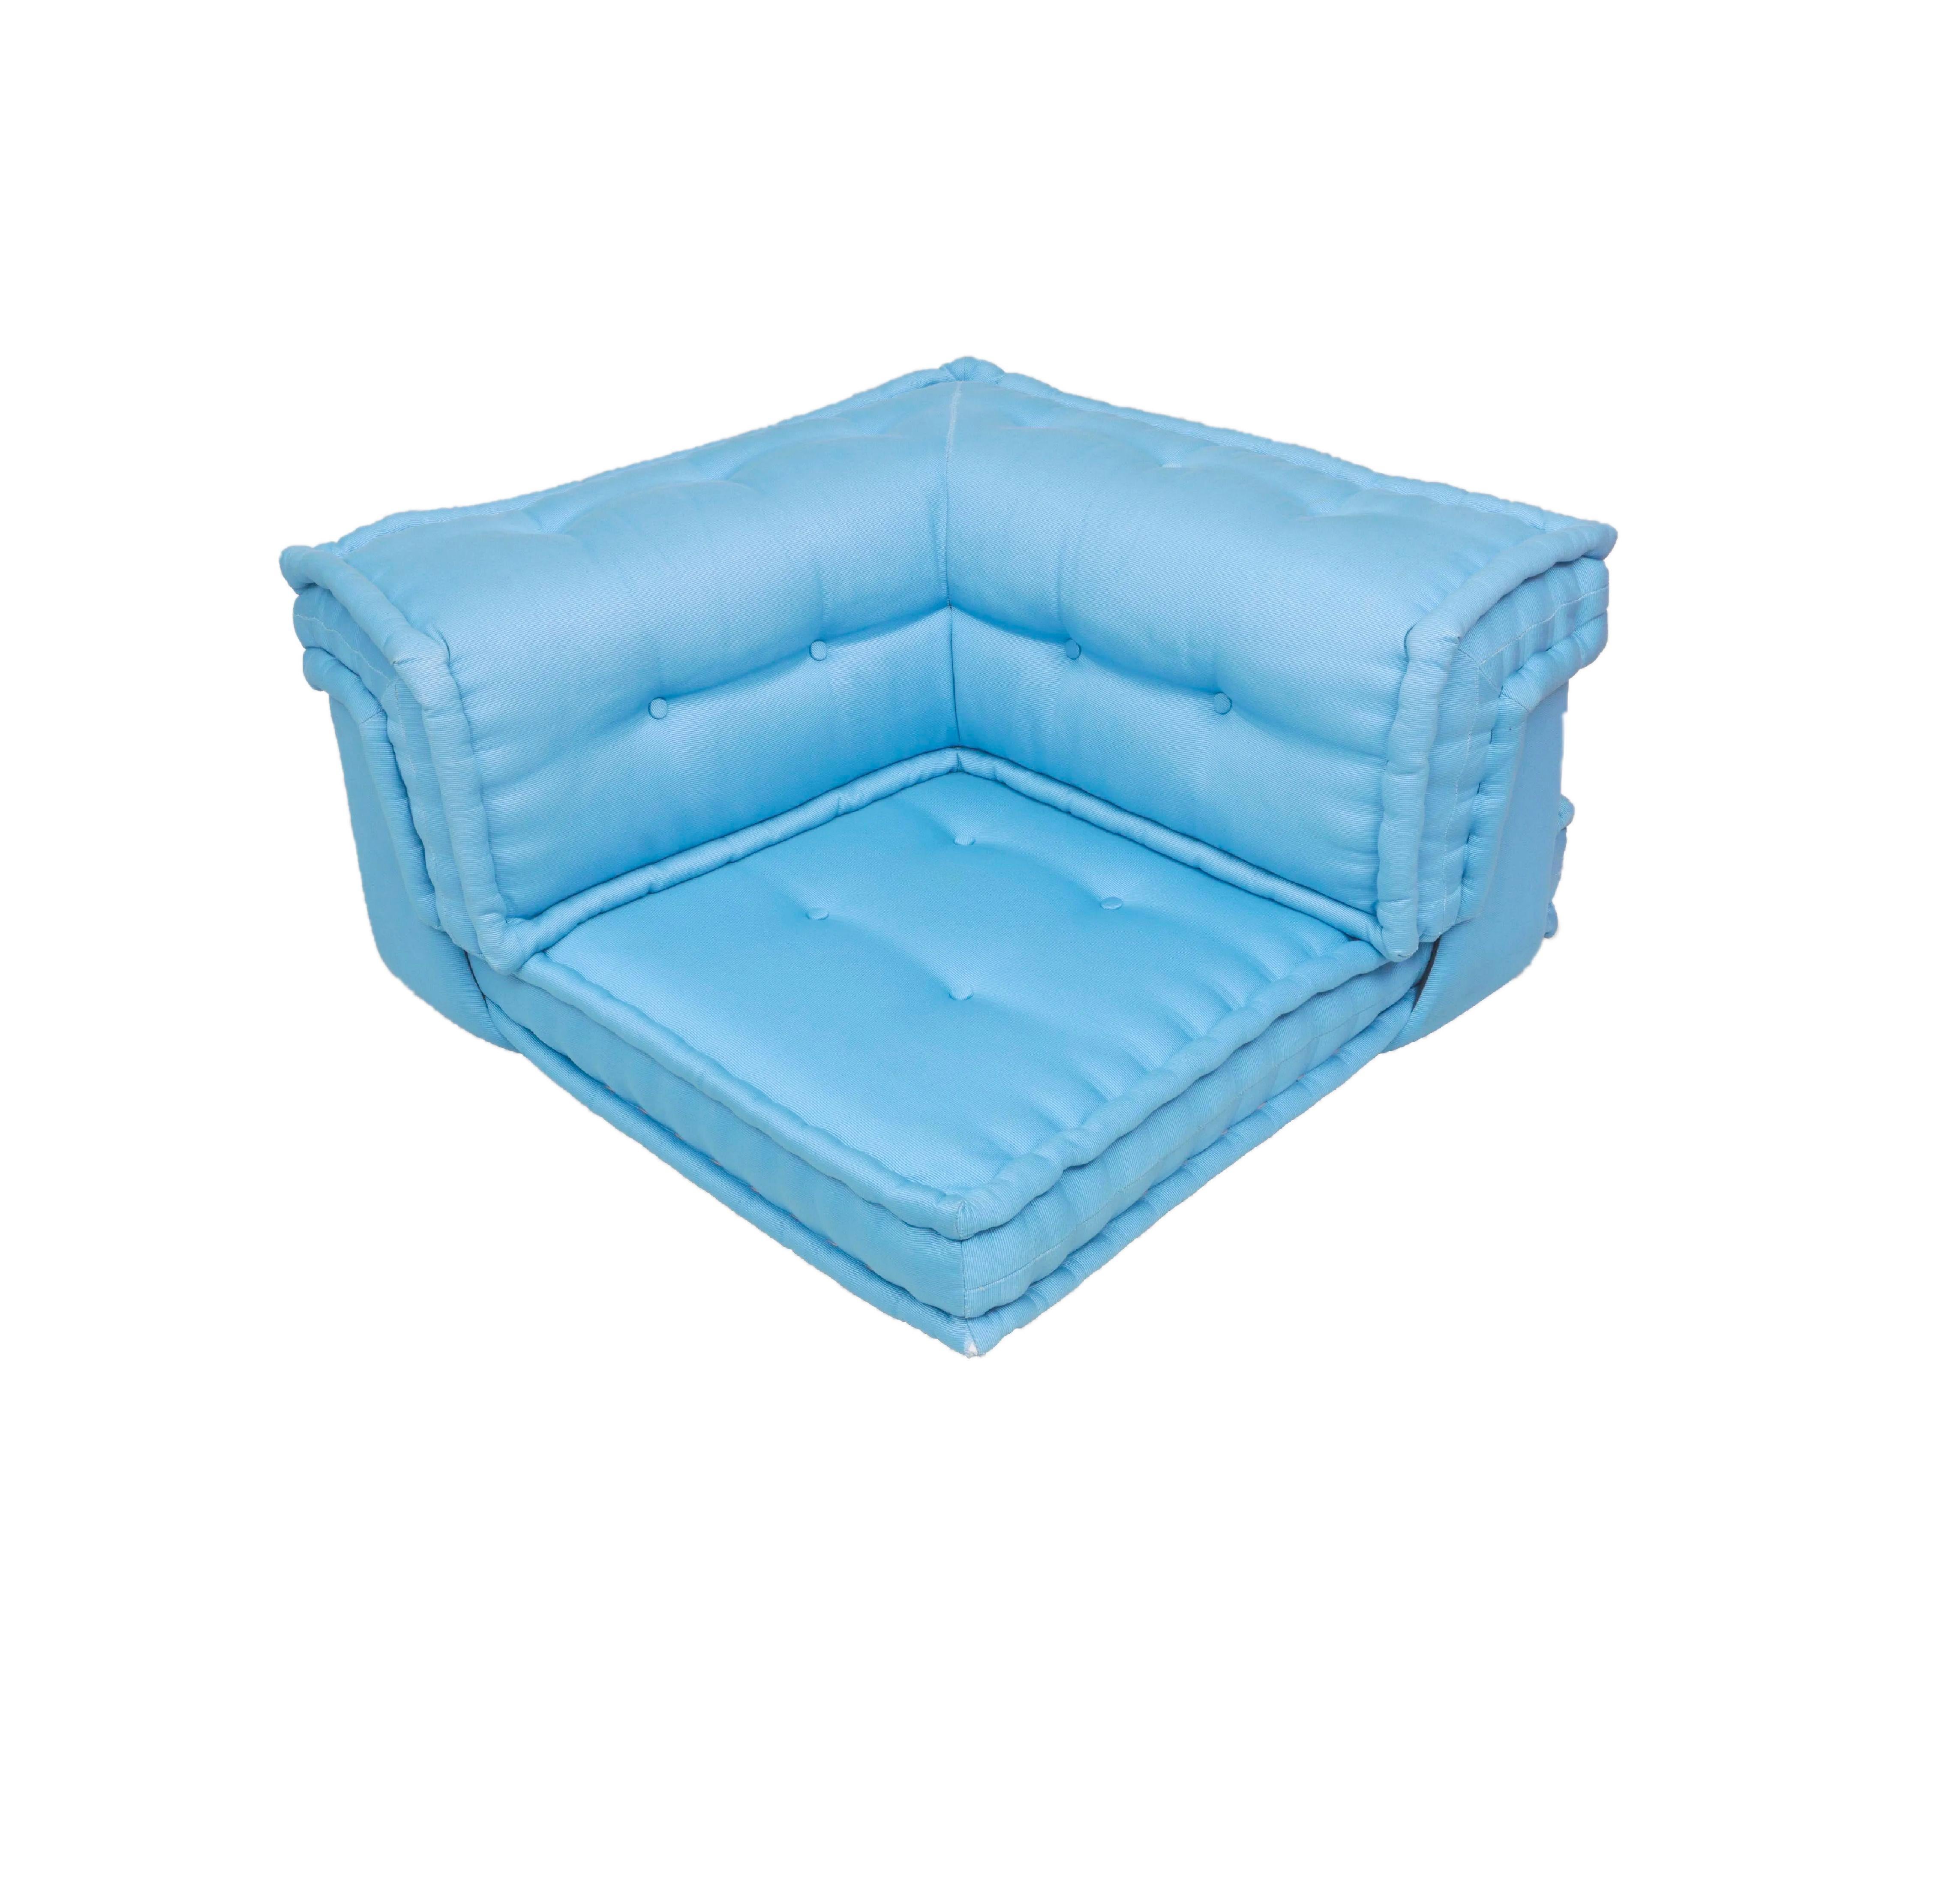 Le Mah Jong Roche Bobois custom springtime pastel modular sofa l sectional set. This listing is for a set of 6 square elements, 3 straight back elements and 2 corner elements. 
From Roche Bobois: Hans Hopfer designed the Mah Jong in 1971, with an